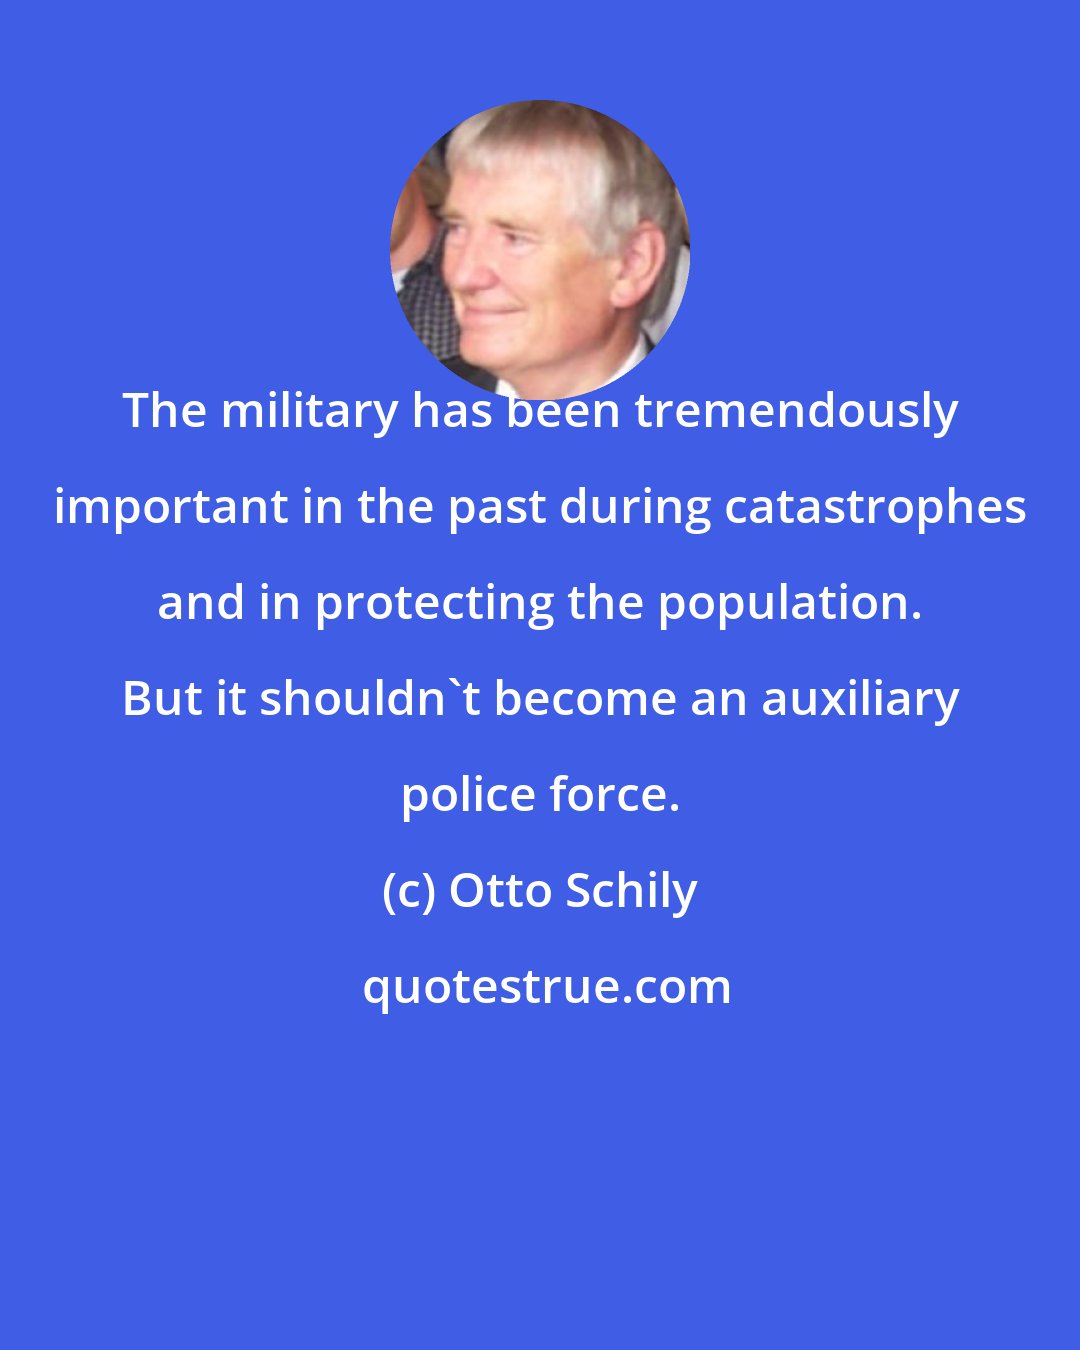 Otto Schily: The military has been tremendously important in the past during catastrophes and in protecting the population. But it shouldn't become an auxiliary police force.